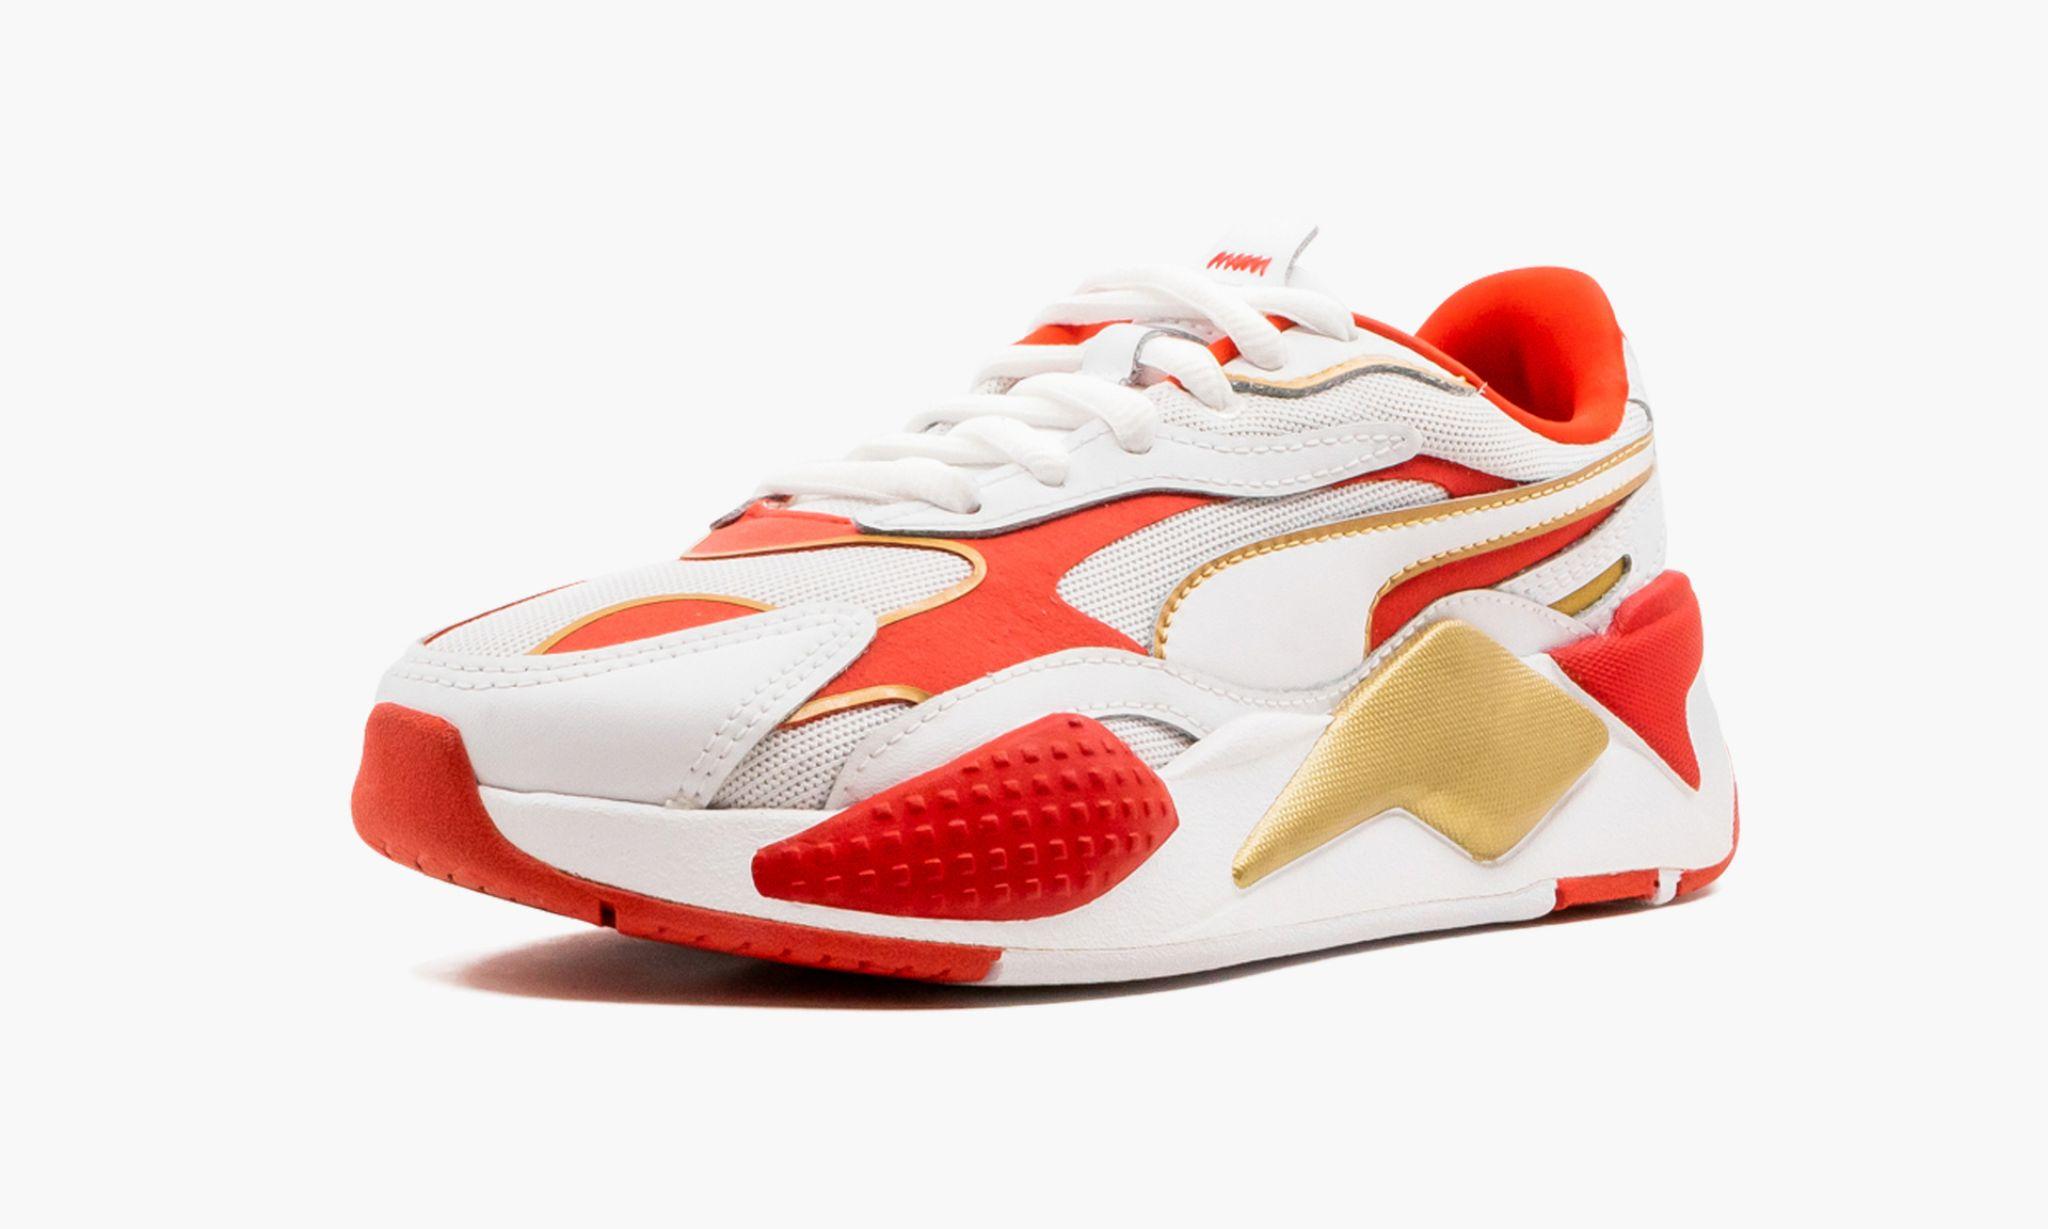 PUMA Rubber Rs-x3 Varsity "white / Red / Gold" Shoes | Lyst